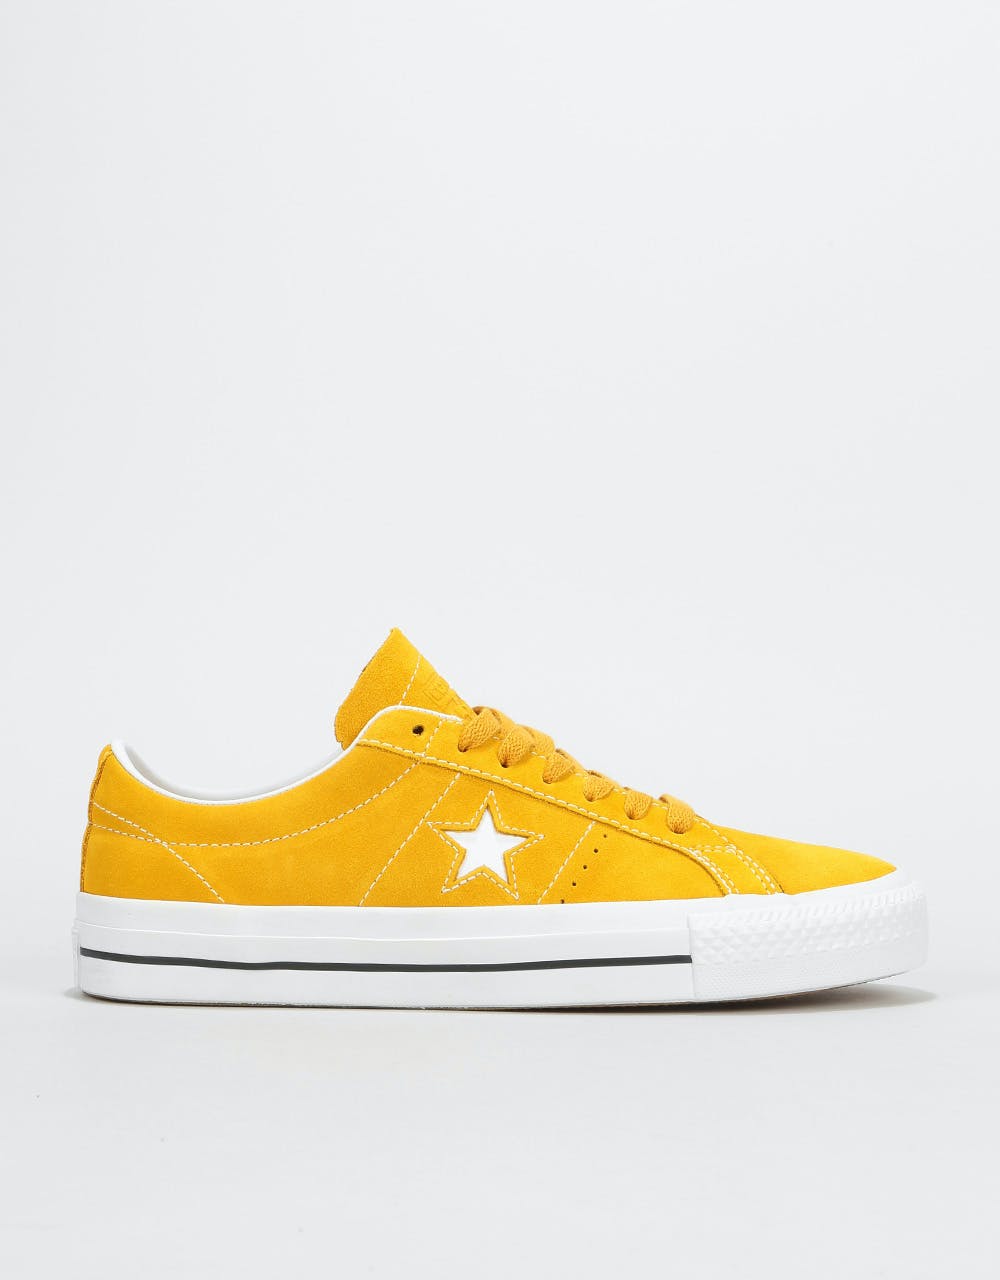 Converse One Star Pro Ox Skate Shoes - Mineral Yellow/White/Black